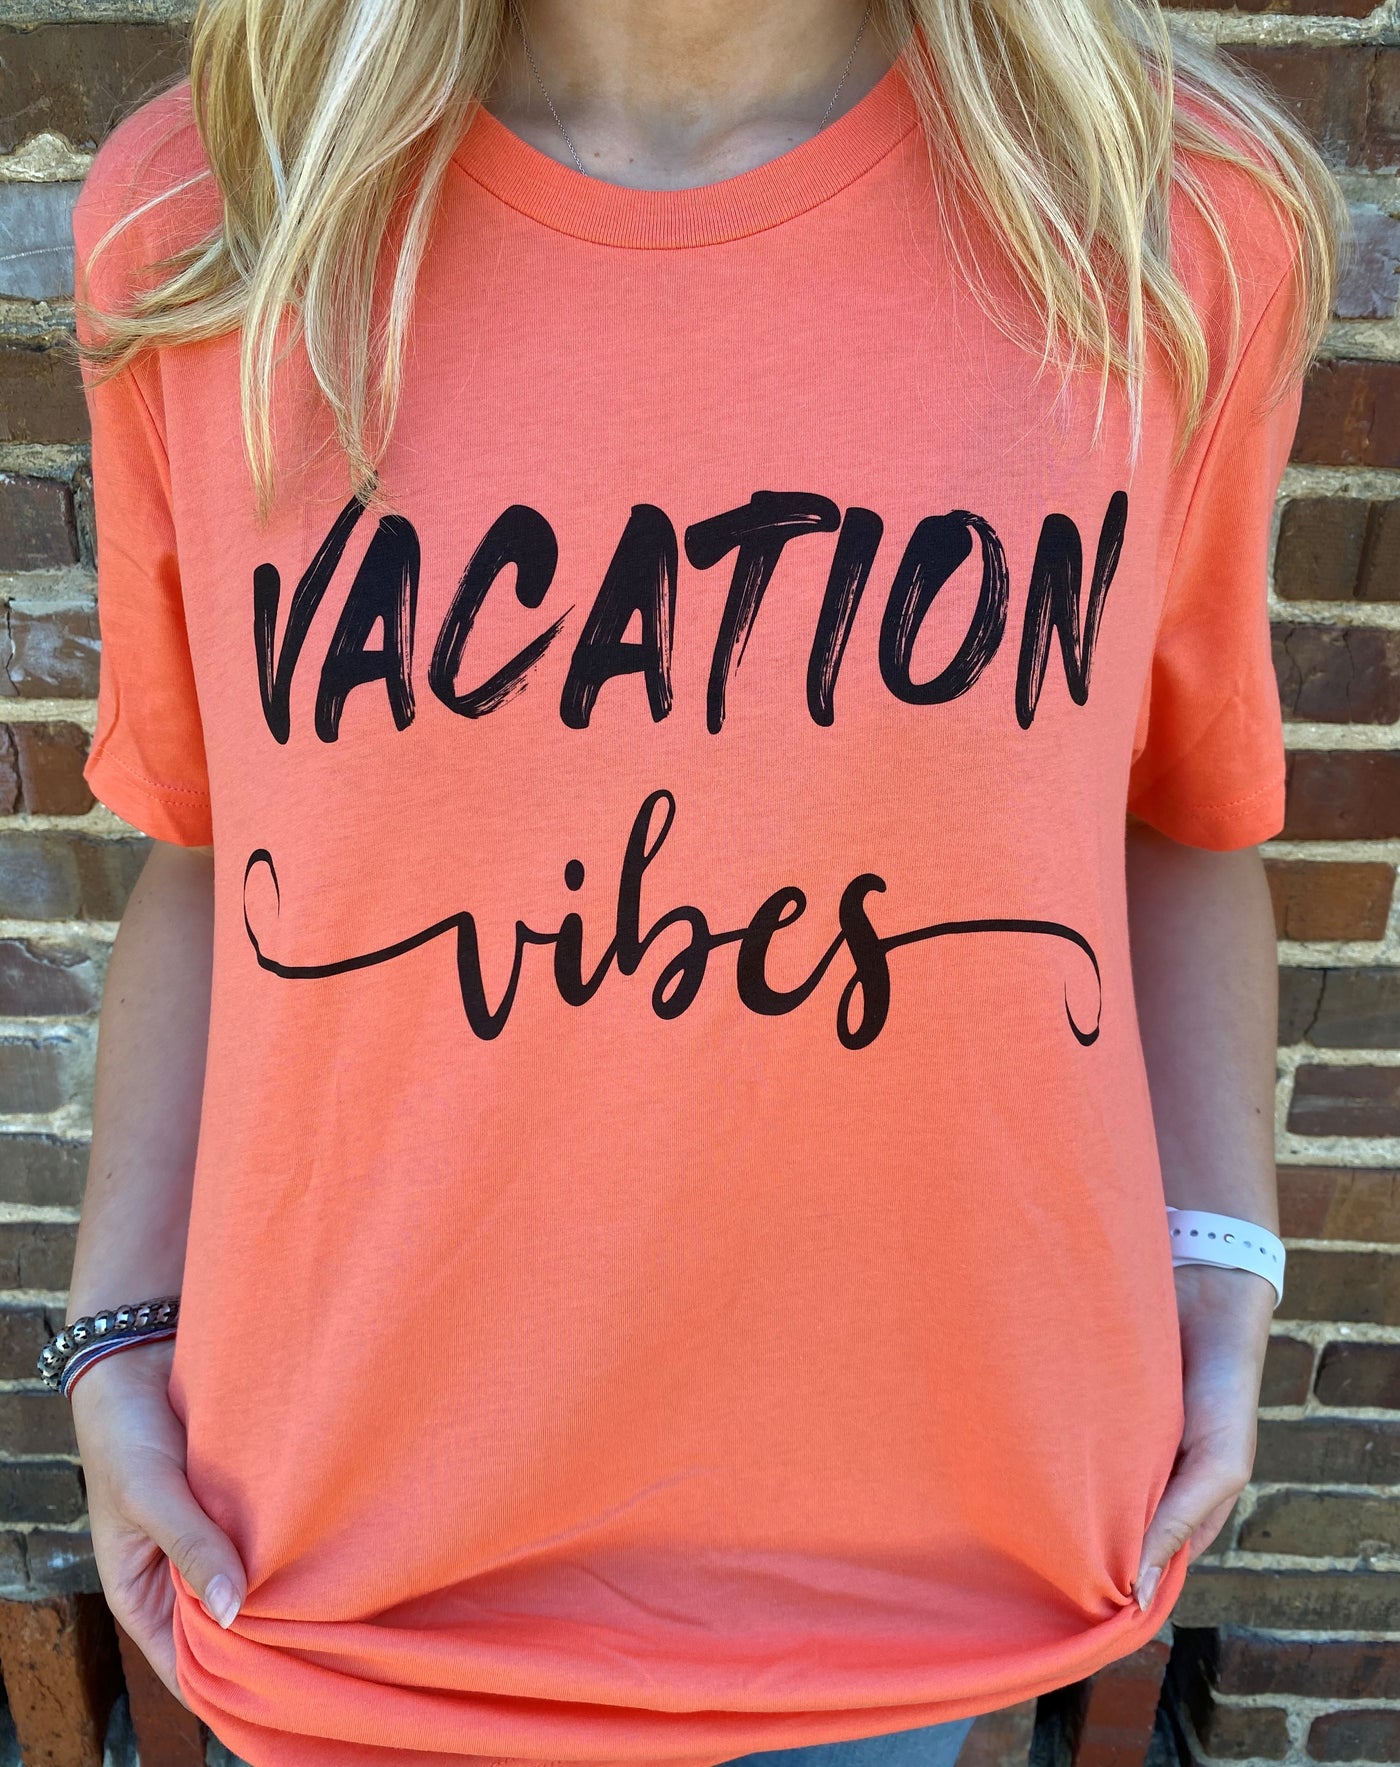 Daydream Tees Vacation Vibes